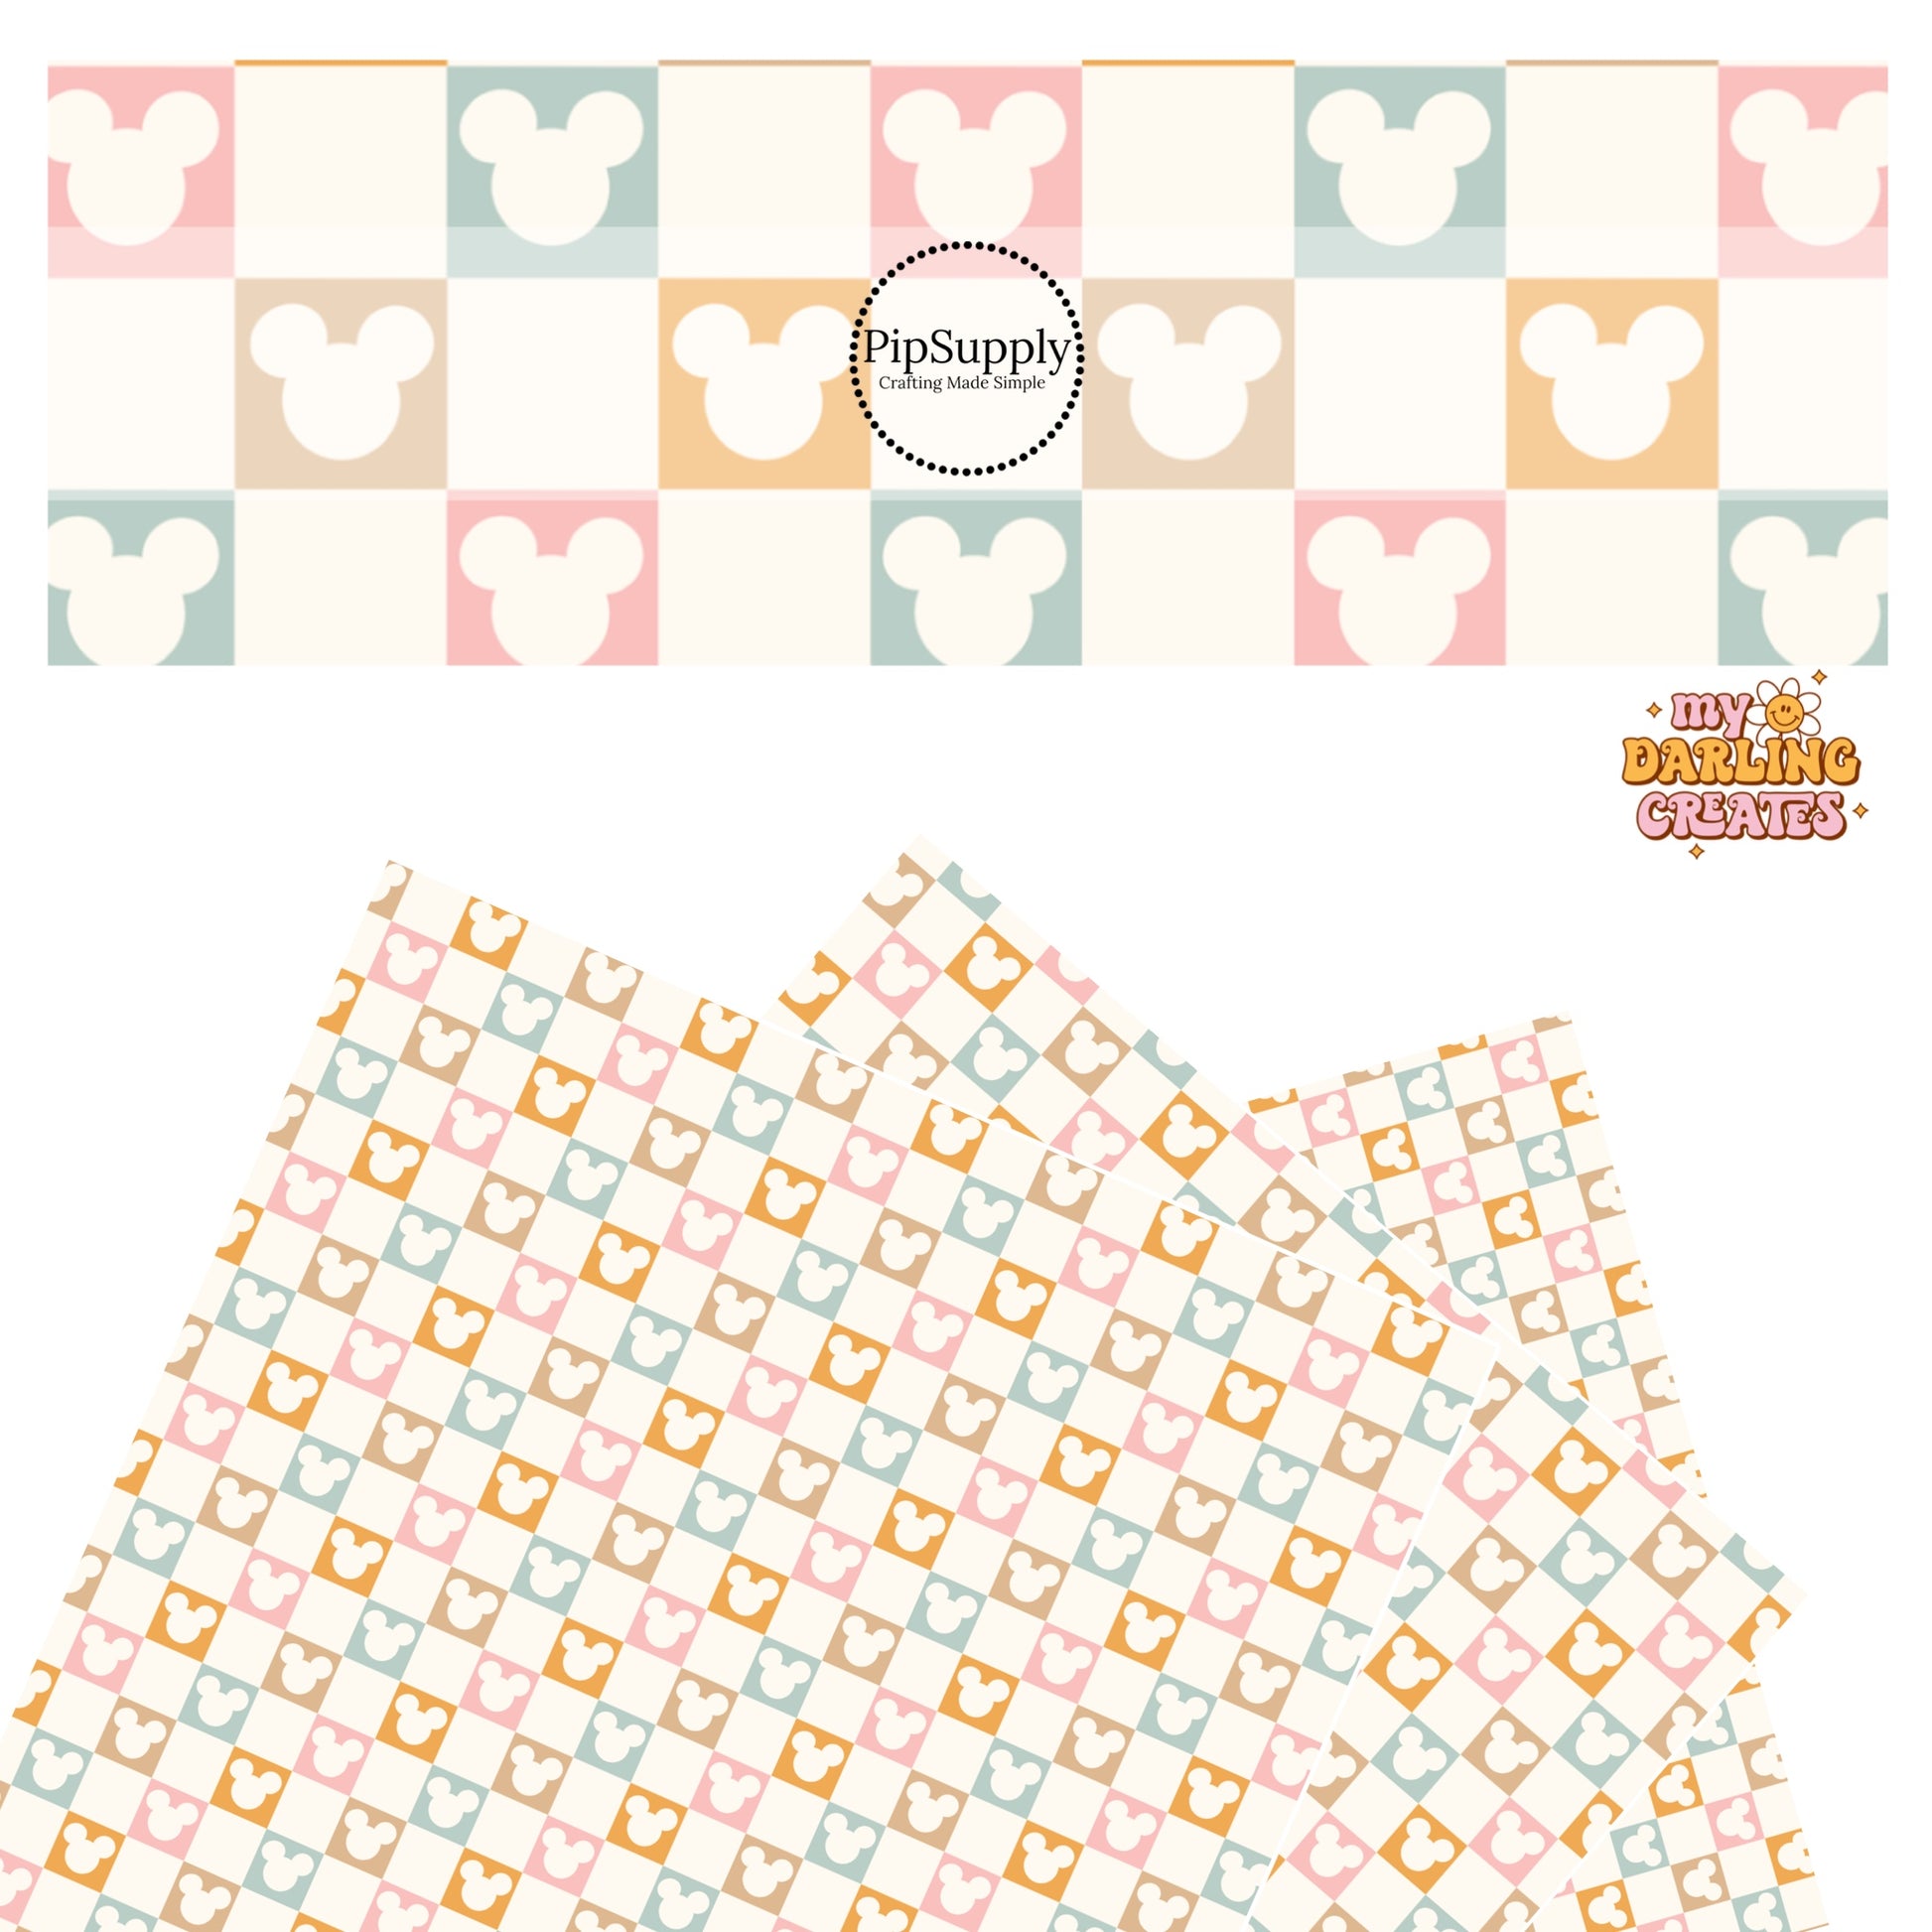 Orange, pink, blue, and tan mouse cutout checkered faux leather sheets